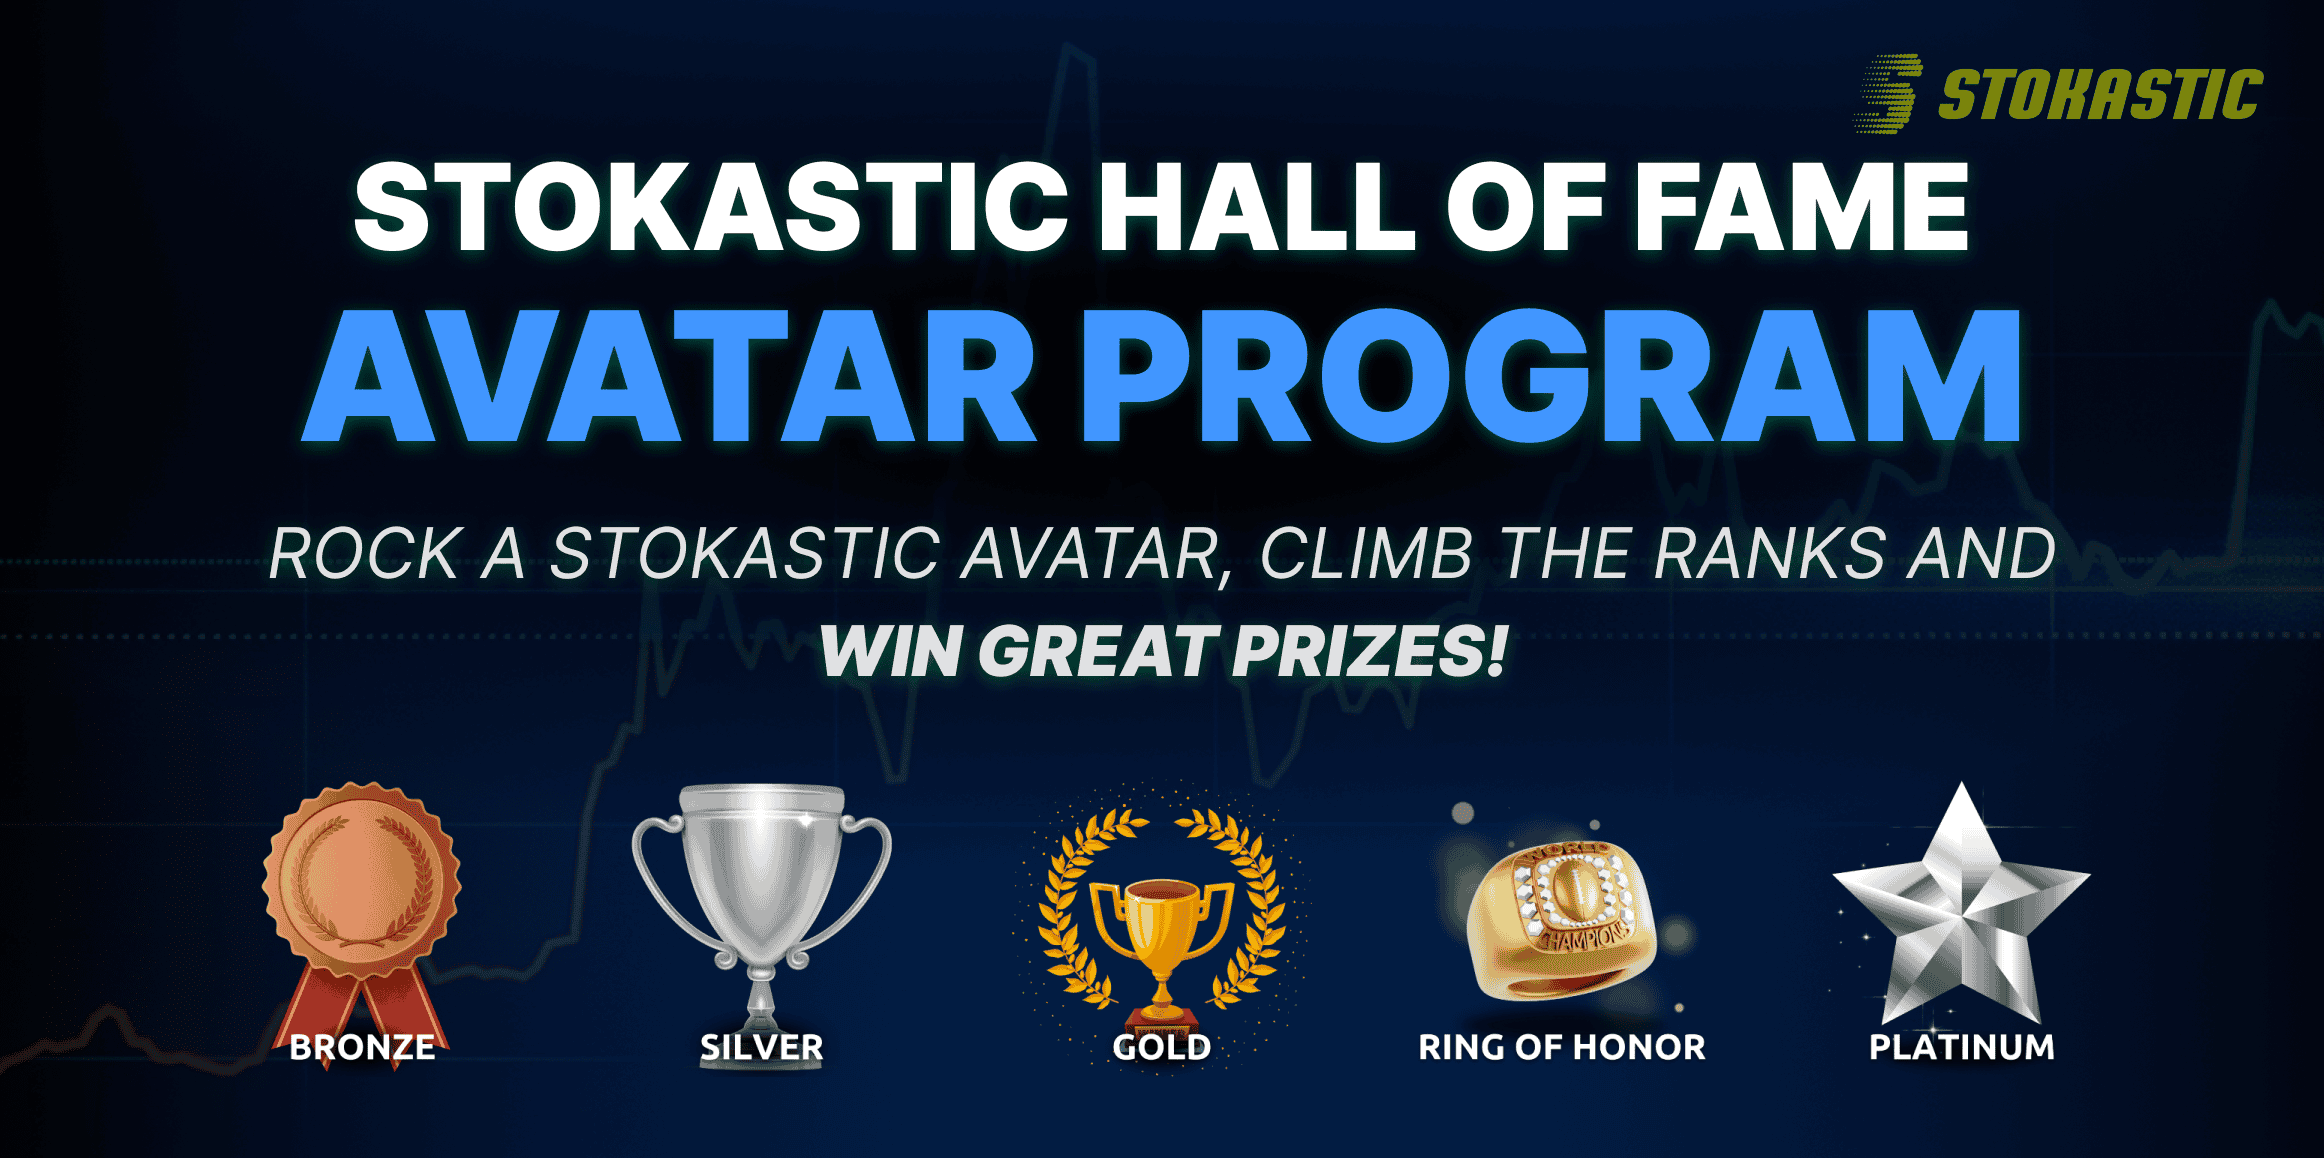 NEW Stokastic Avatar Program: Win Prizes When You Rock Our Logo!